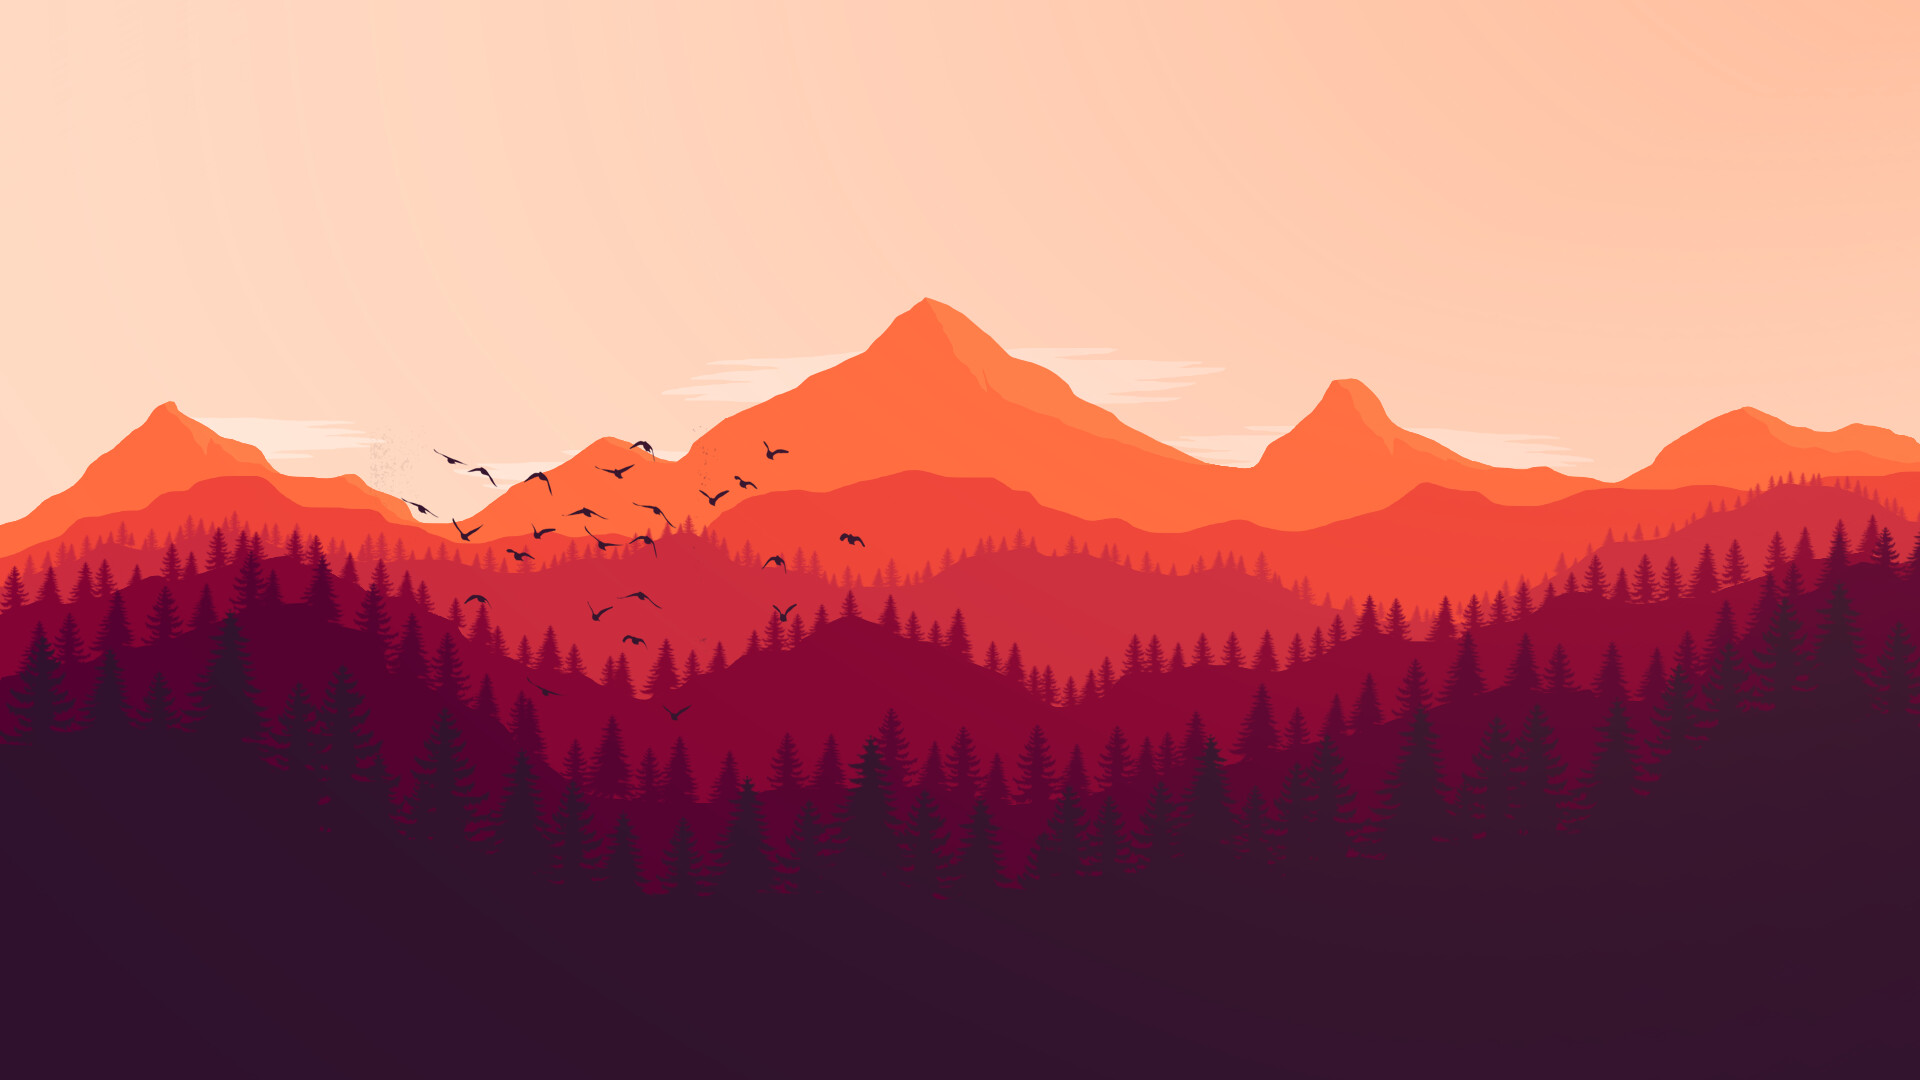 Firewatch: Set amid the wilderness of Shoshone National Forest, this enigmatic adventure offers a compelling meditation on love, loss and loneliness, Video game. 1920x1080 Full HD Wallpaper.